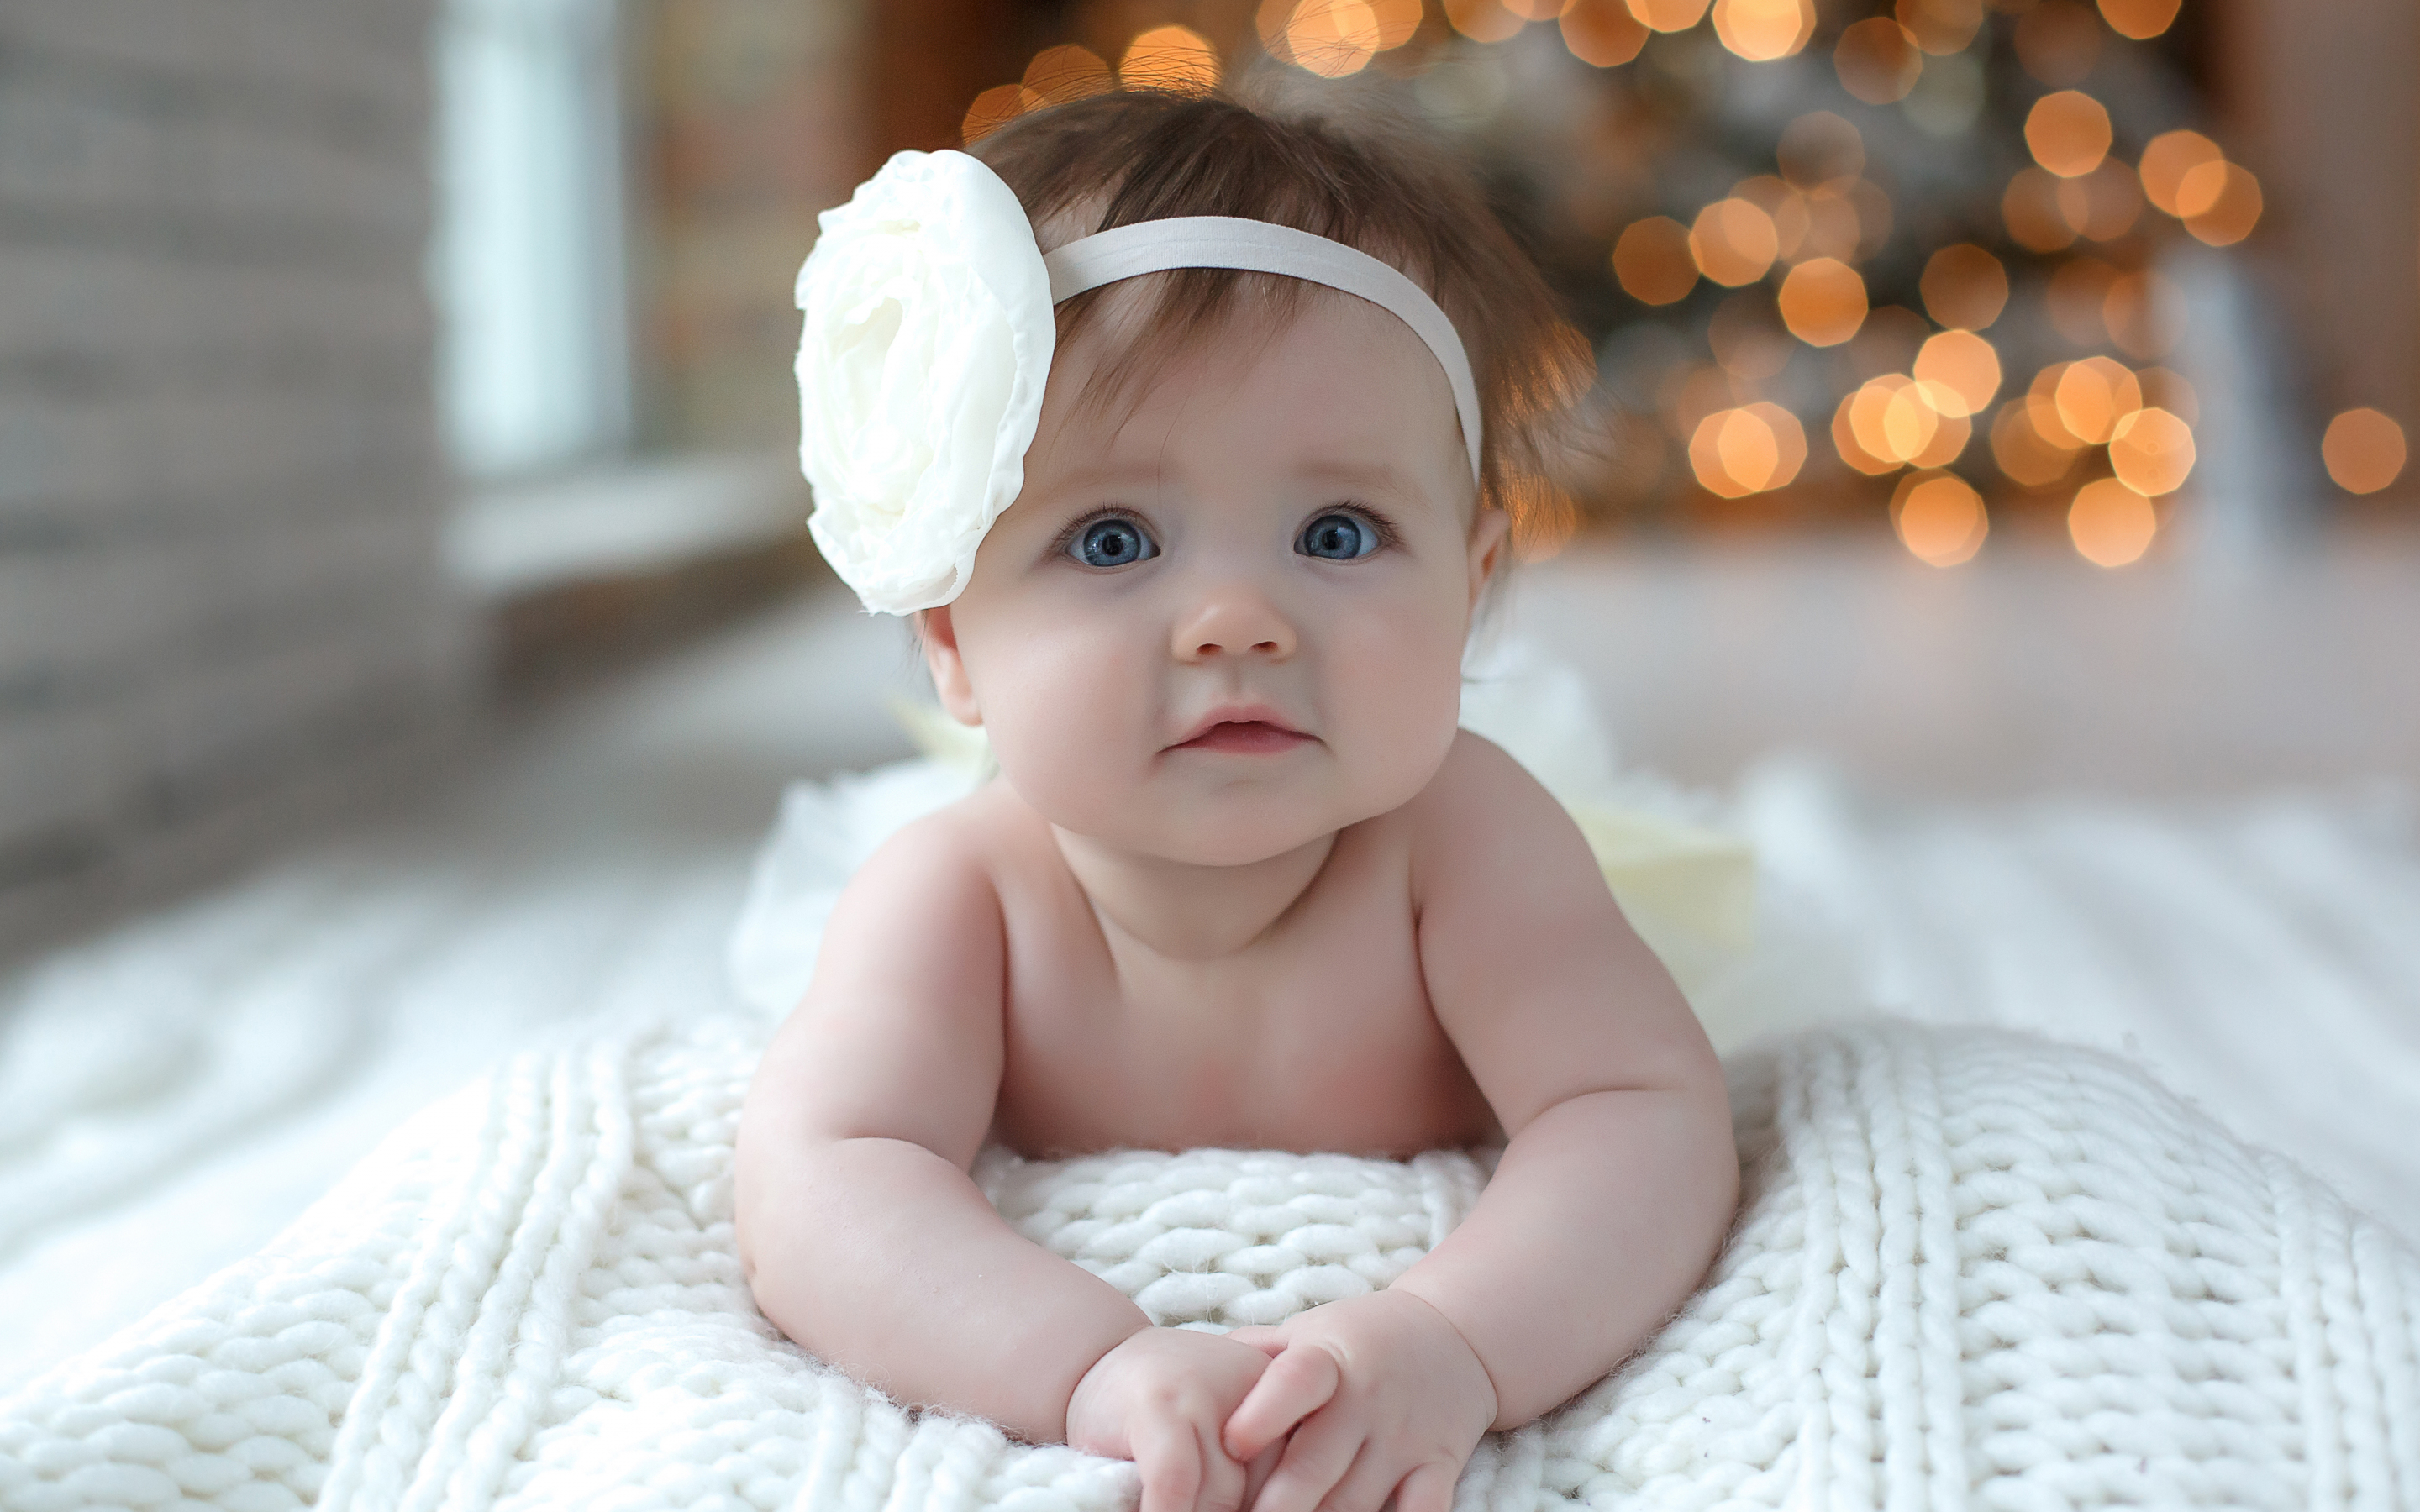 Cute and adorable kid, blue eyes, photoshoot, 2880x1800 wallpaper